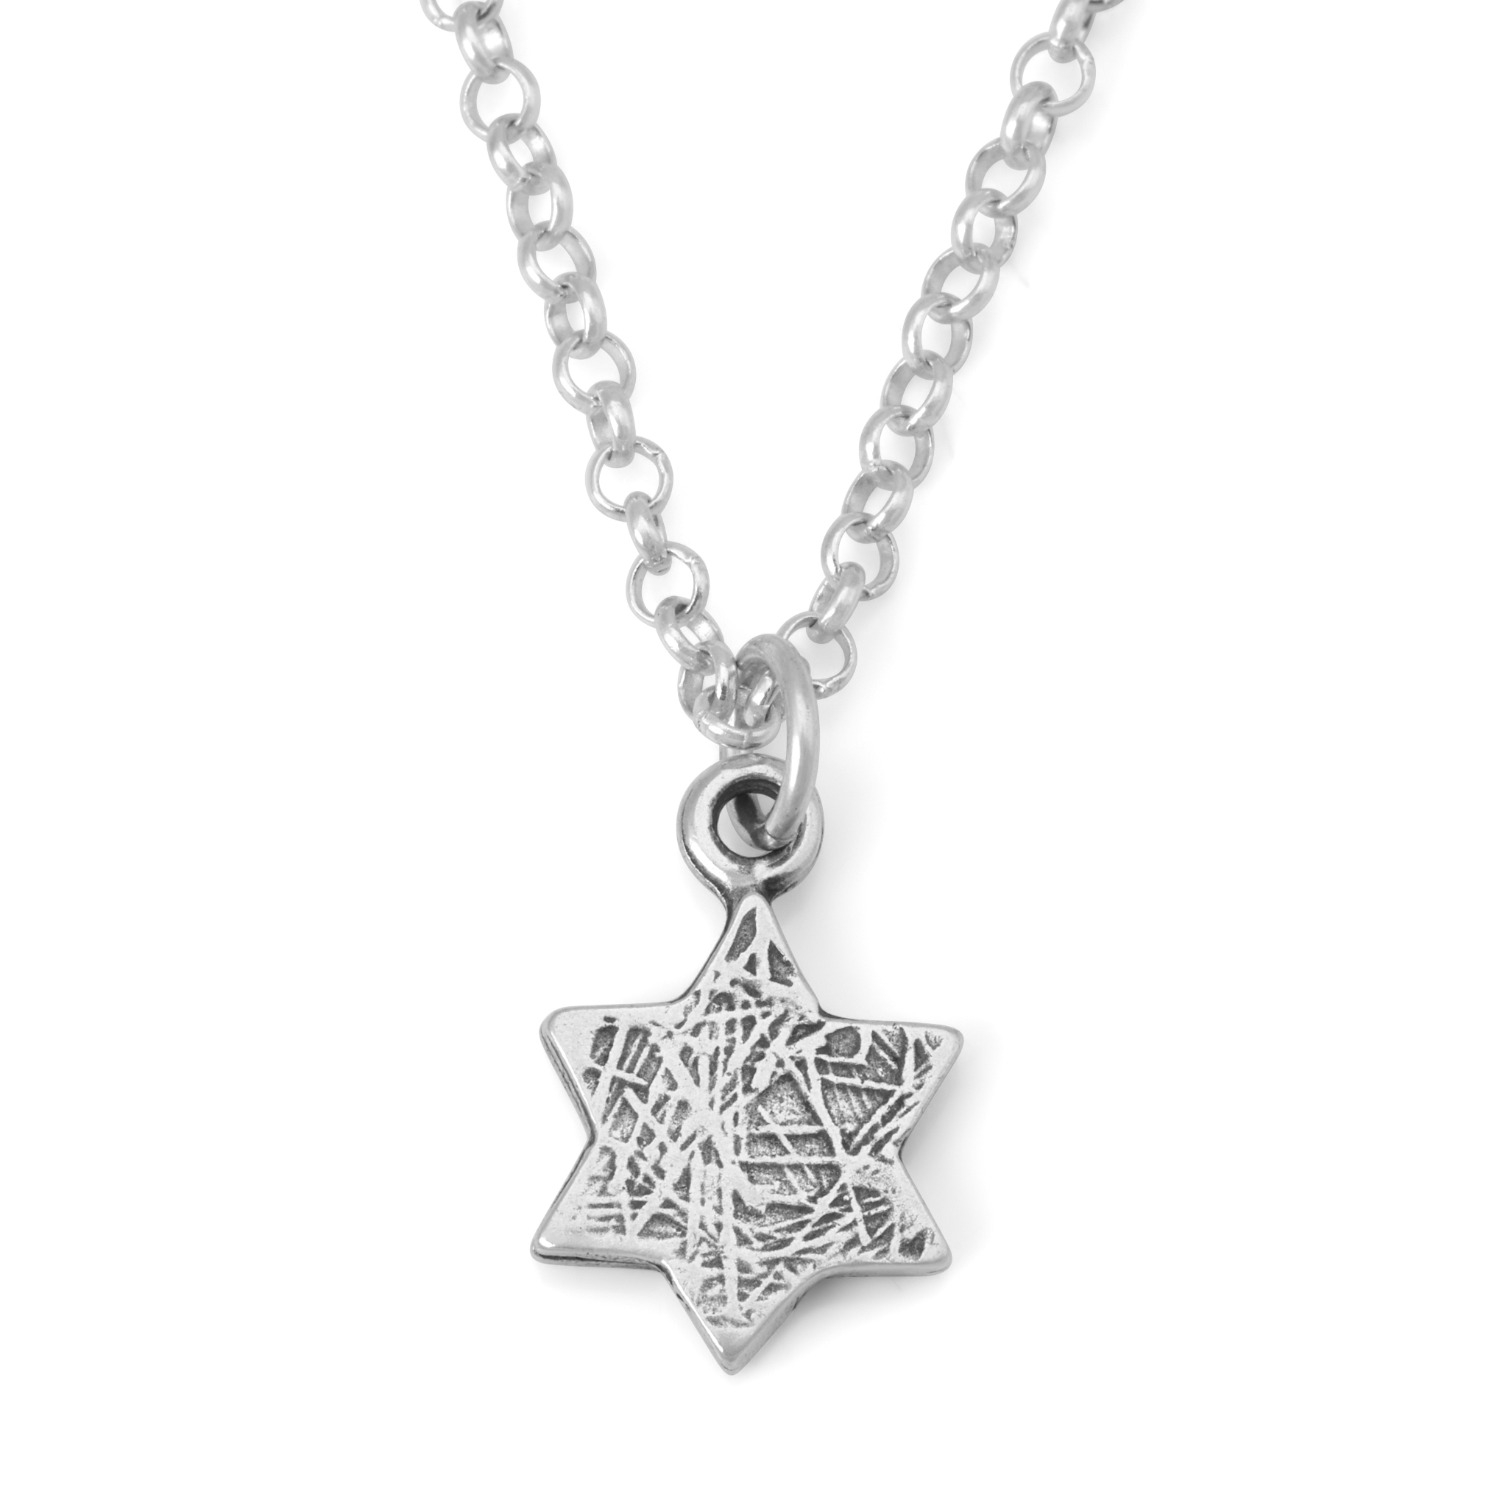 Double Sided Silver Star of David Necklace - 1